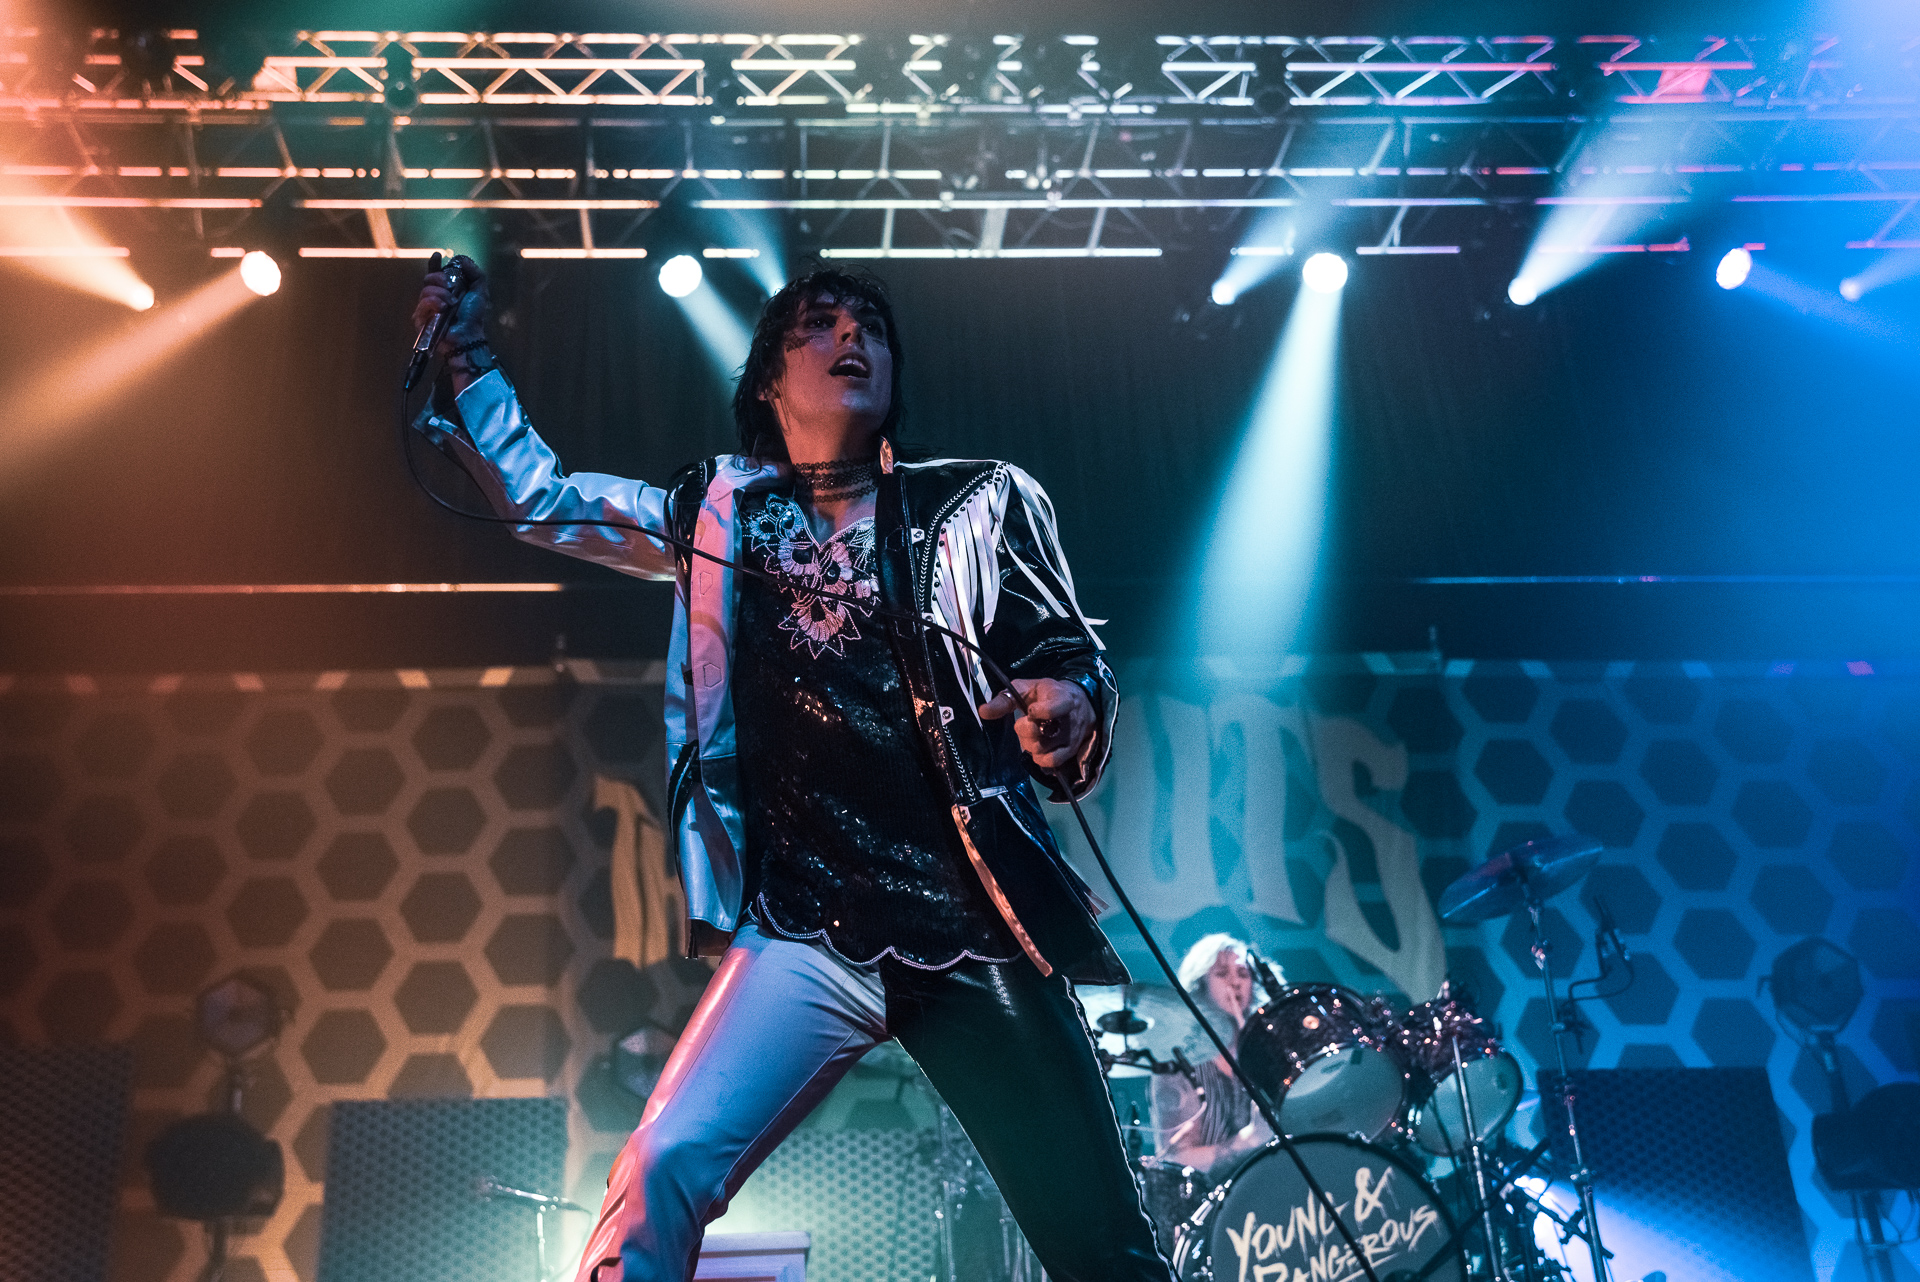 PHOTO GALLERY: The Struts bring glam-rock to Boston